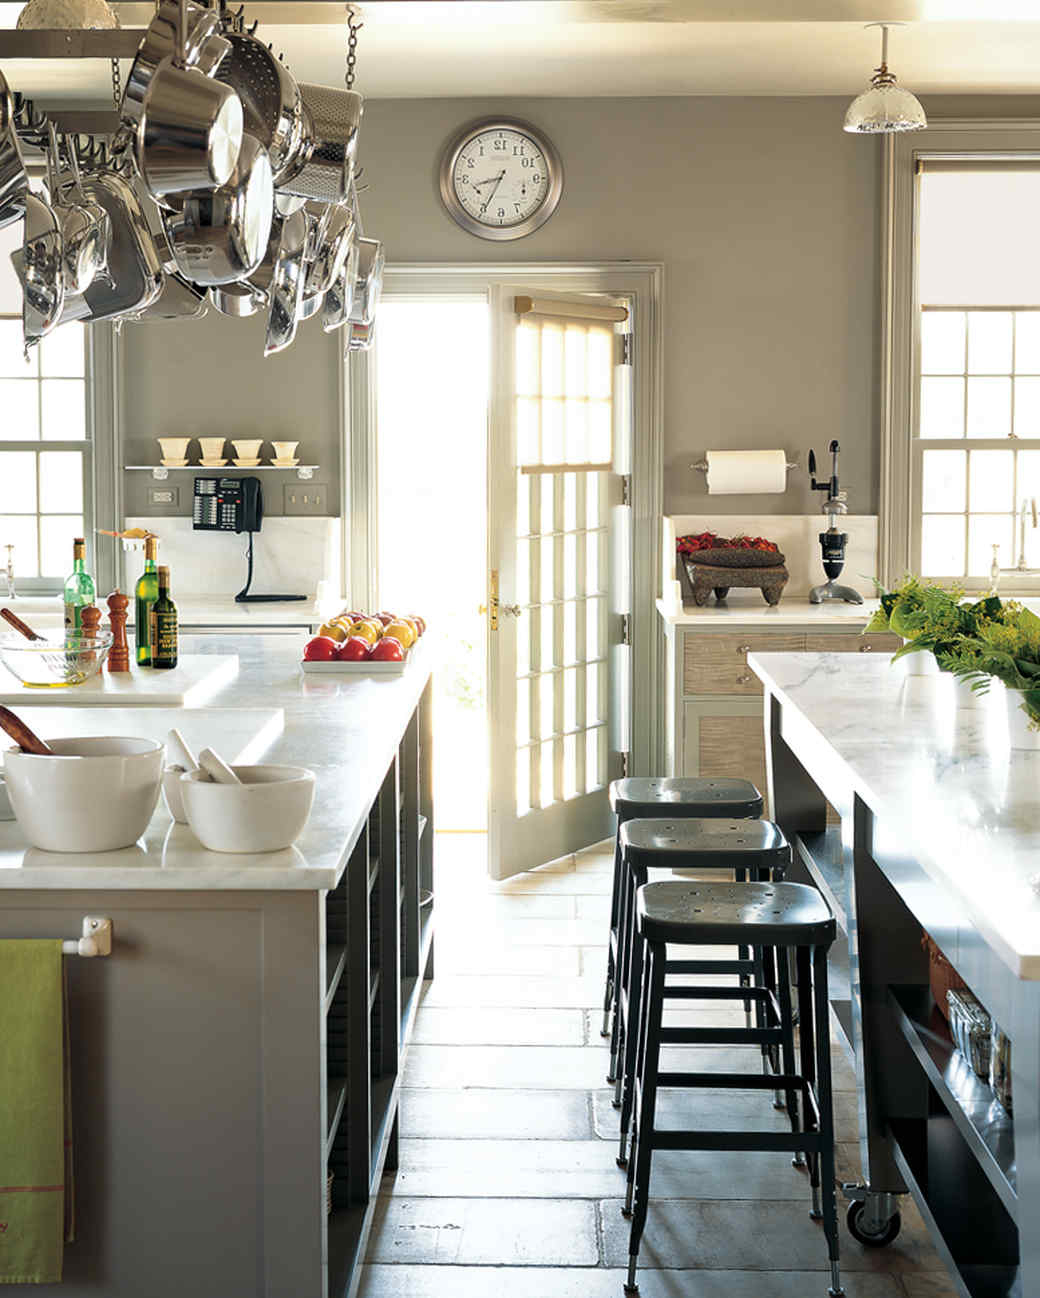 Our Favorite Celebrity Chefs Take Us Inside Their Gorgeous Home Kitchens